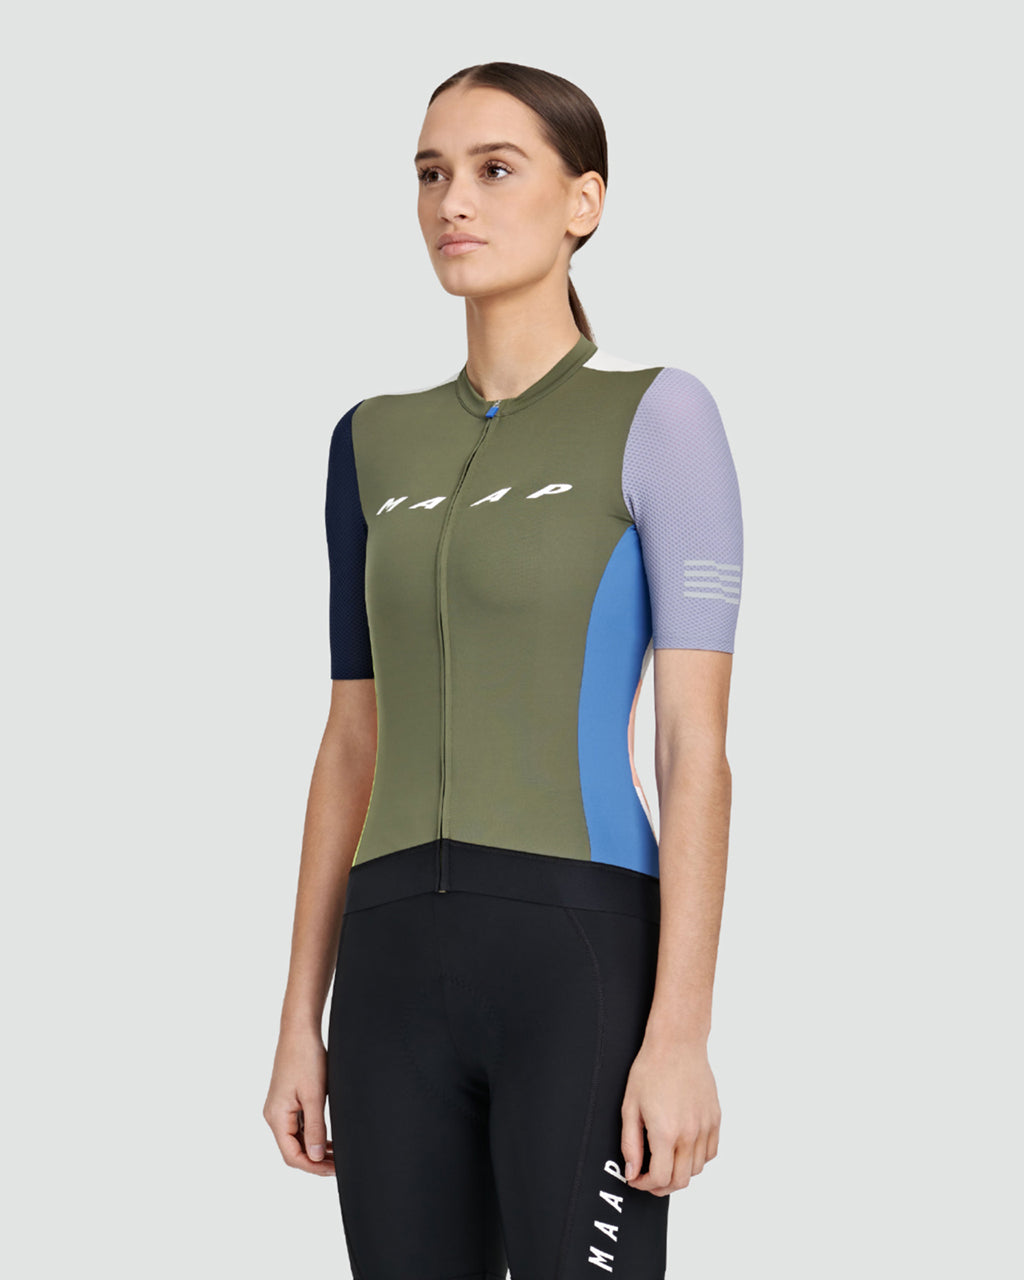 Women's Evade OffCuts Pro Jersey - MAAP Cycling Apparel